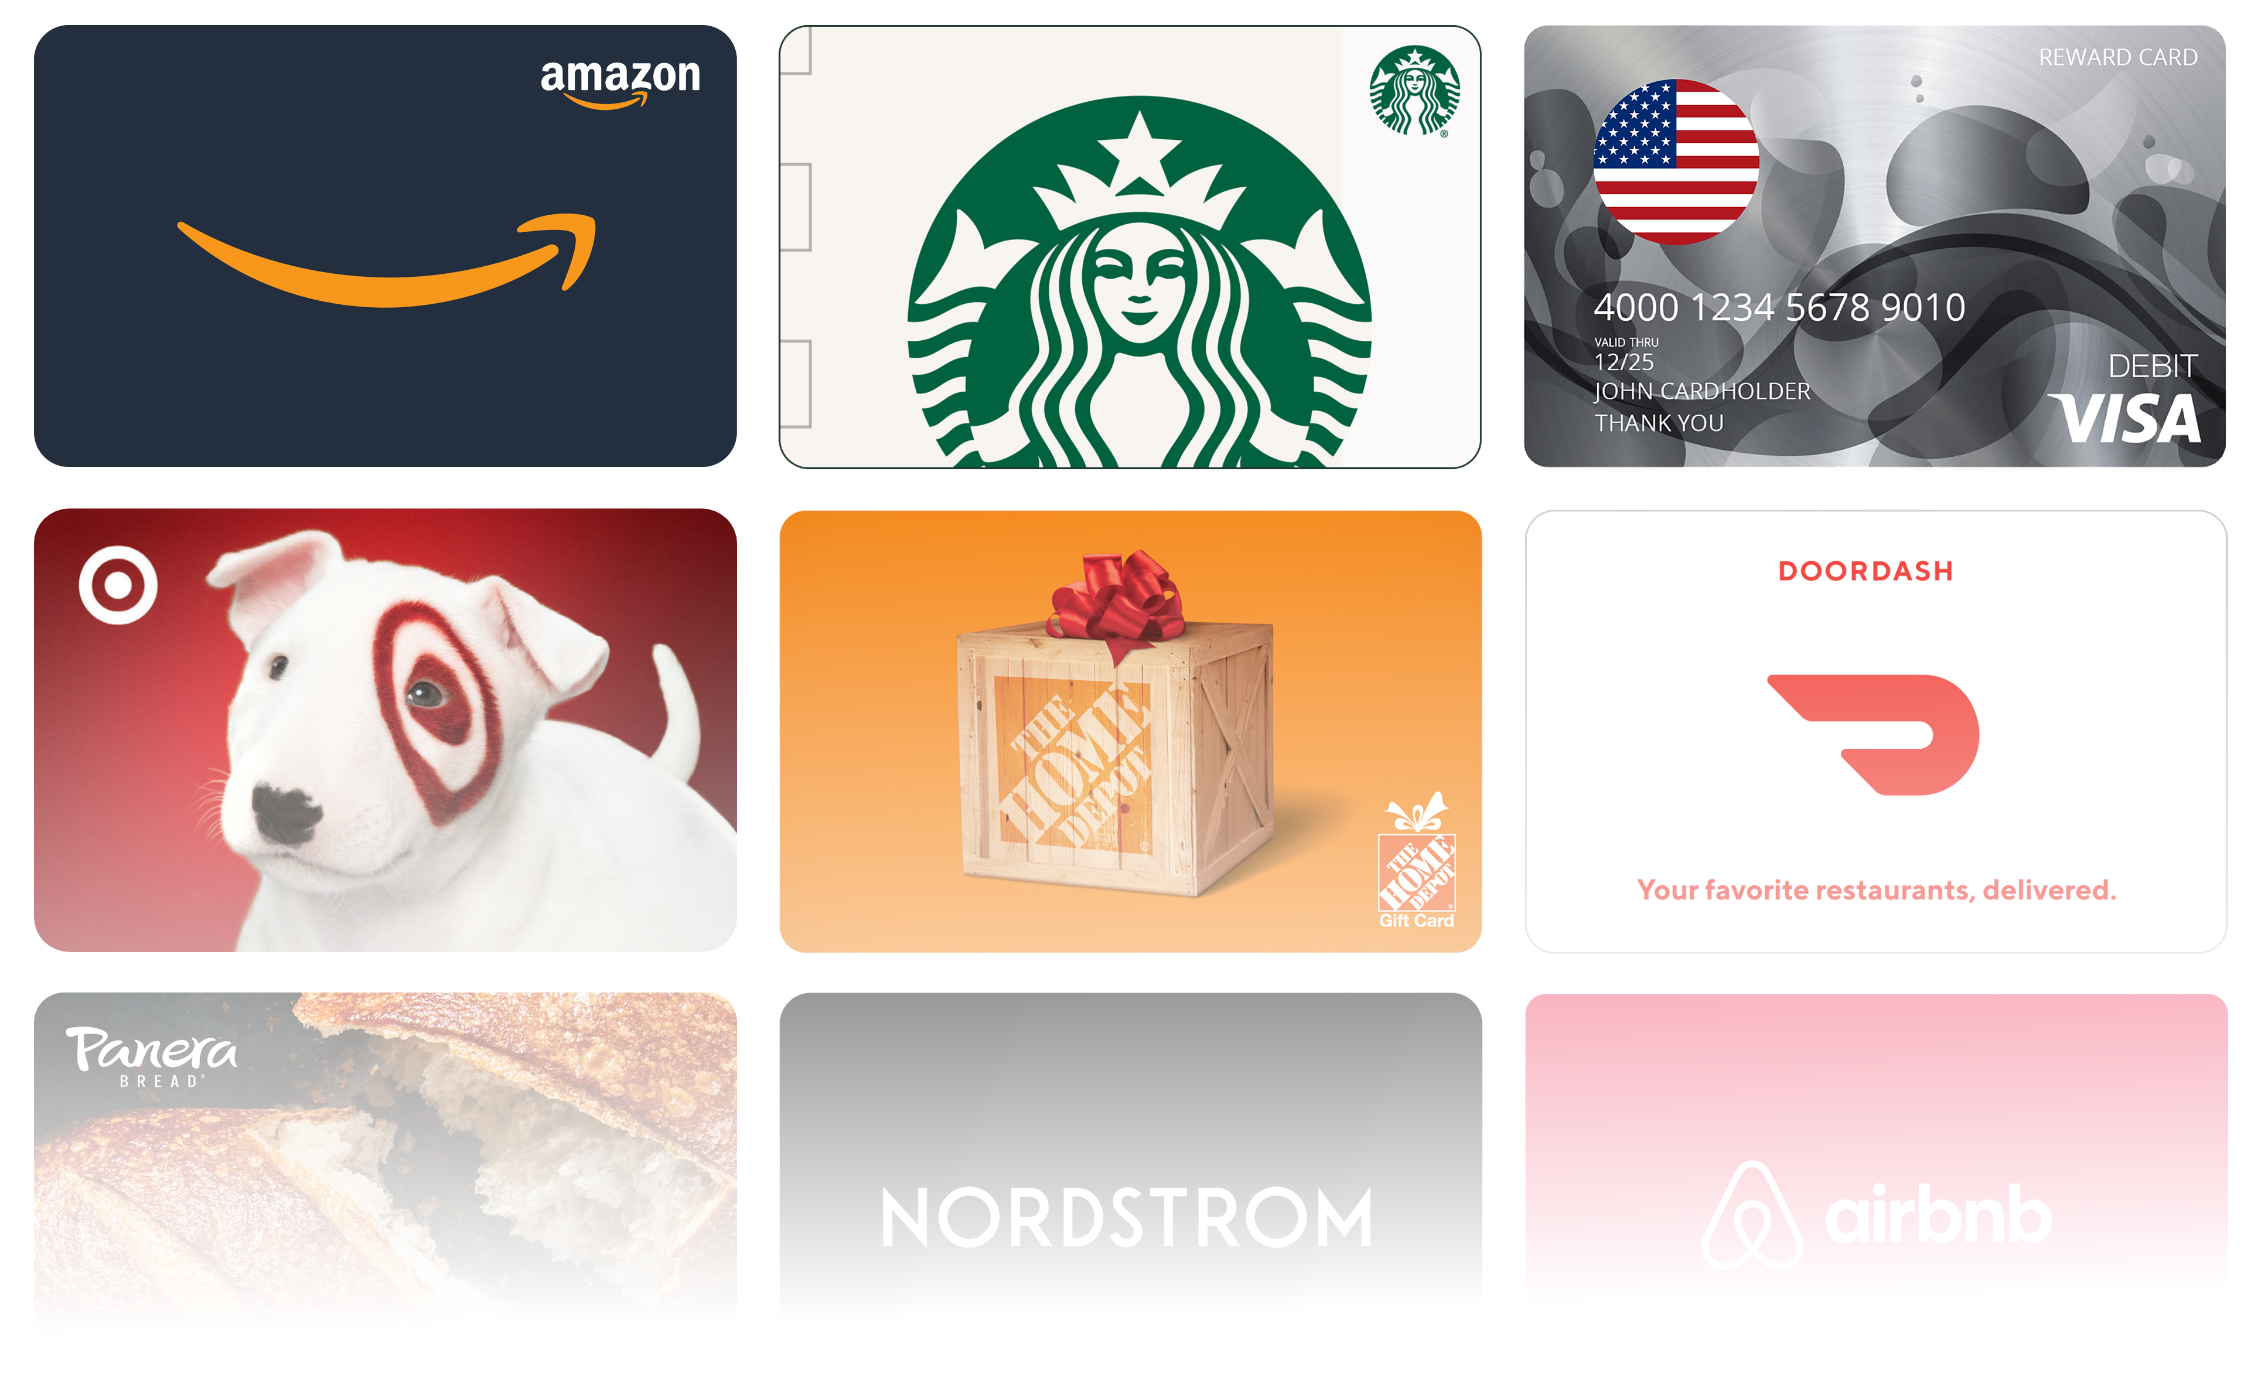 Various gift cards are displayed on a screen, offering rewards and recognition.